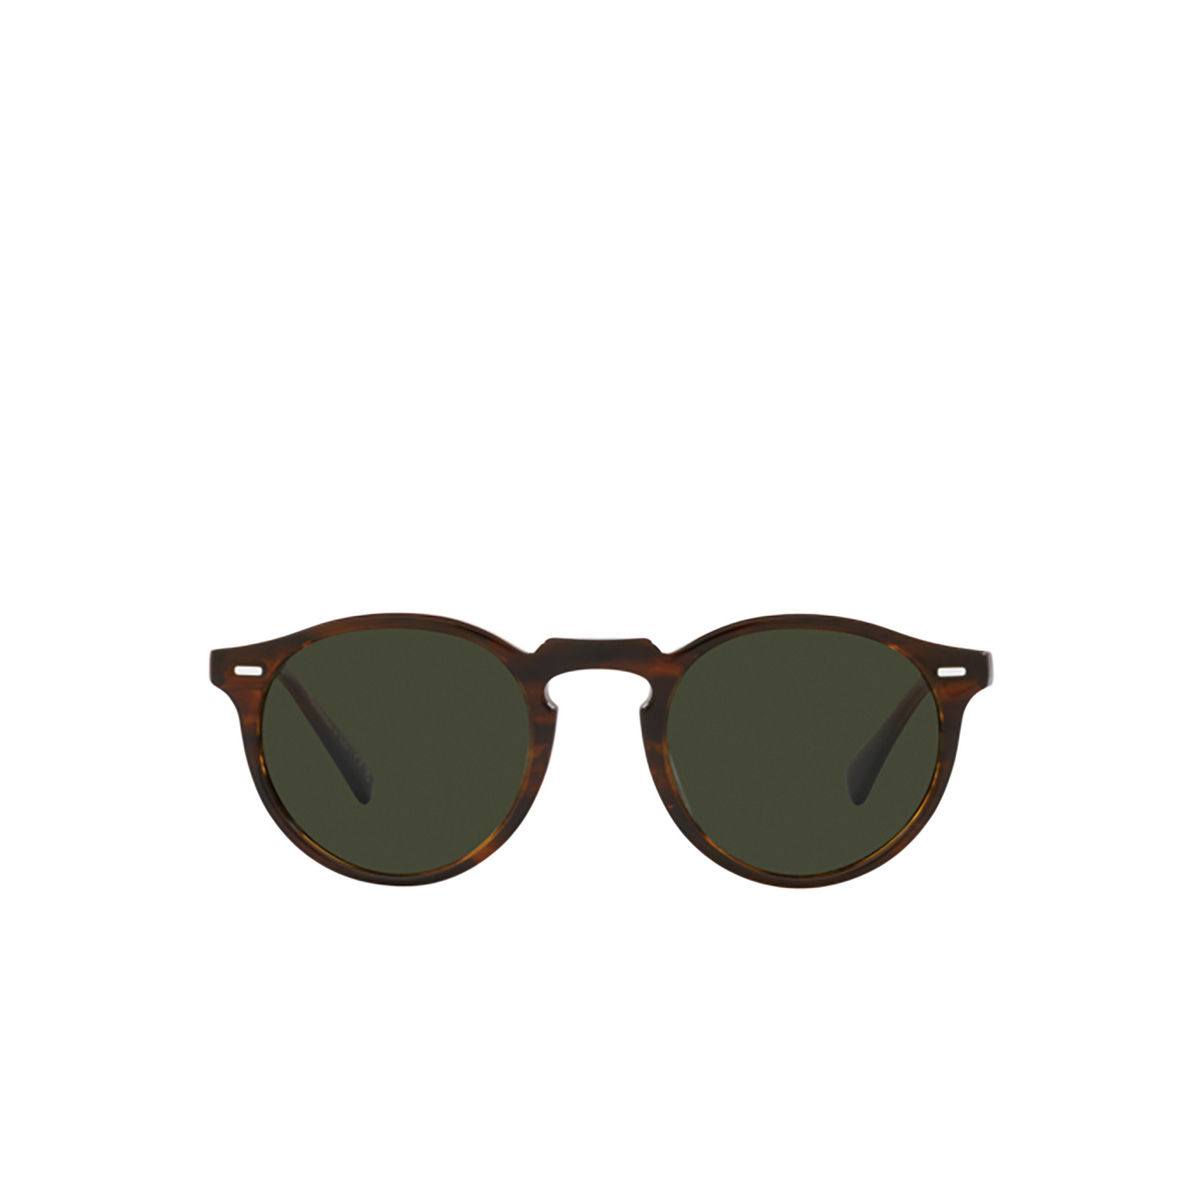 Oliver Peoples OV5217S GREGORY PECK SUN 1724P1 Tuscany Tortoise 1724P1 Tuscany Tortoise - front view